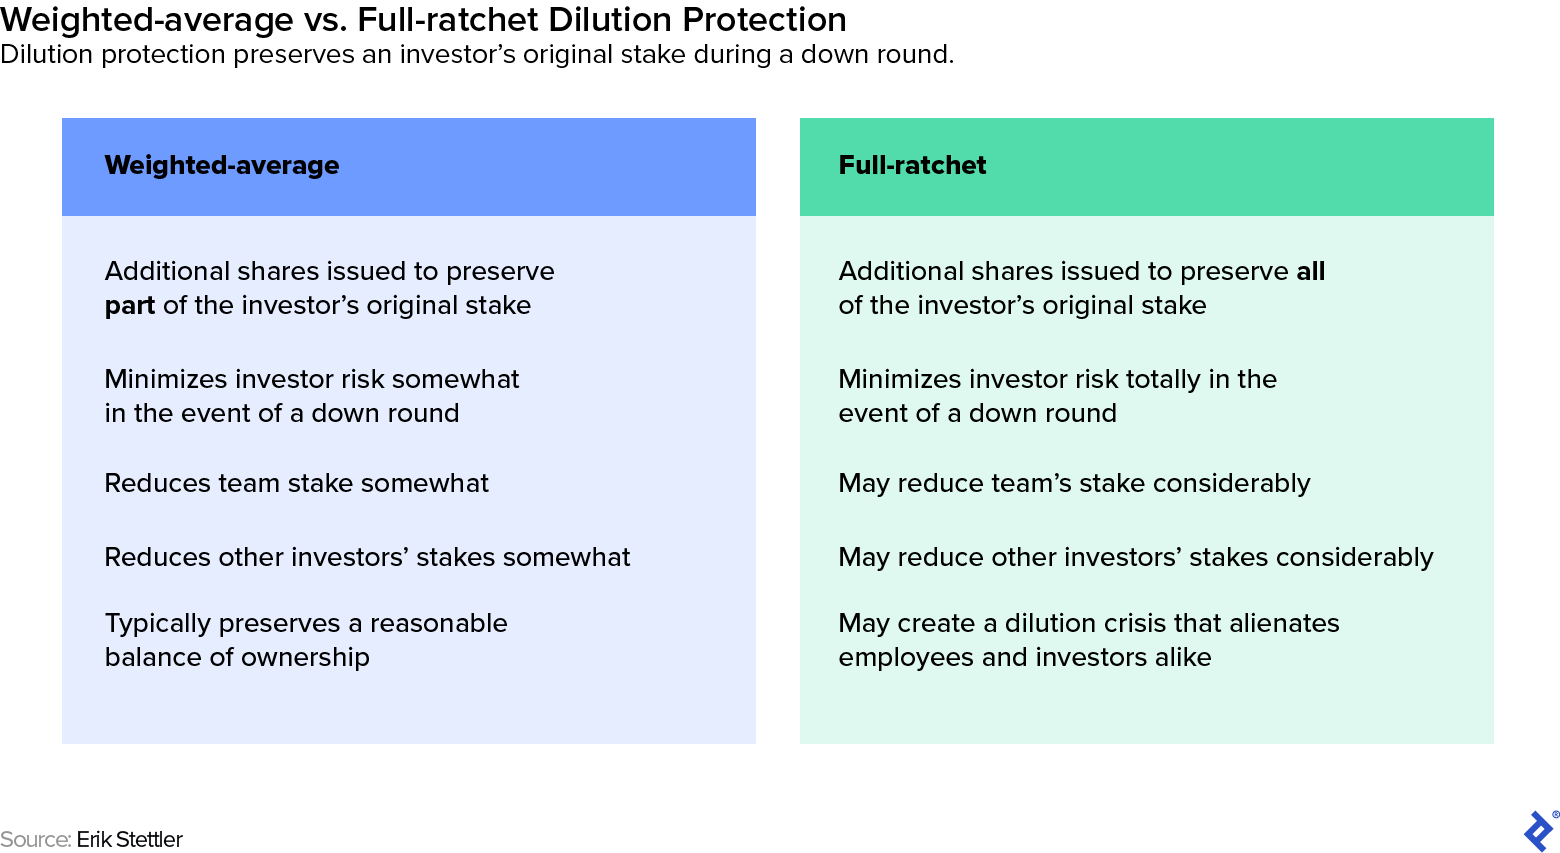 Chart comparing weighted-average and full-ratchet dilution protection, summarizing takeaways discussed throughout this story.